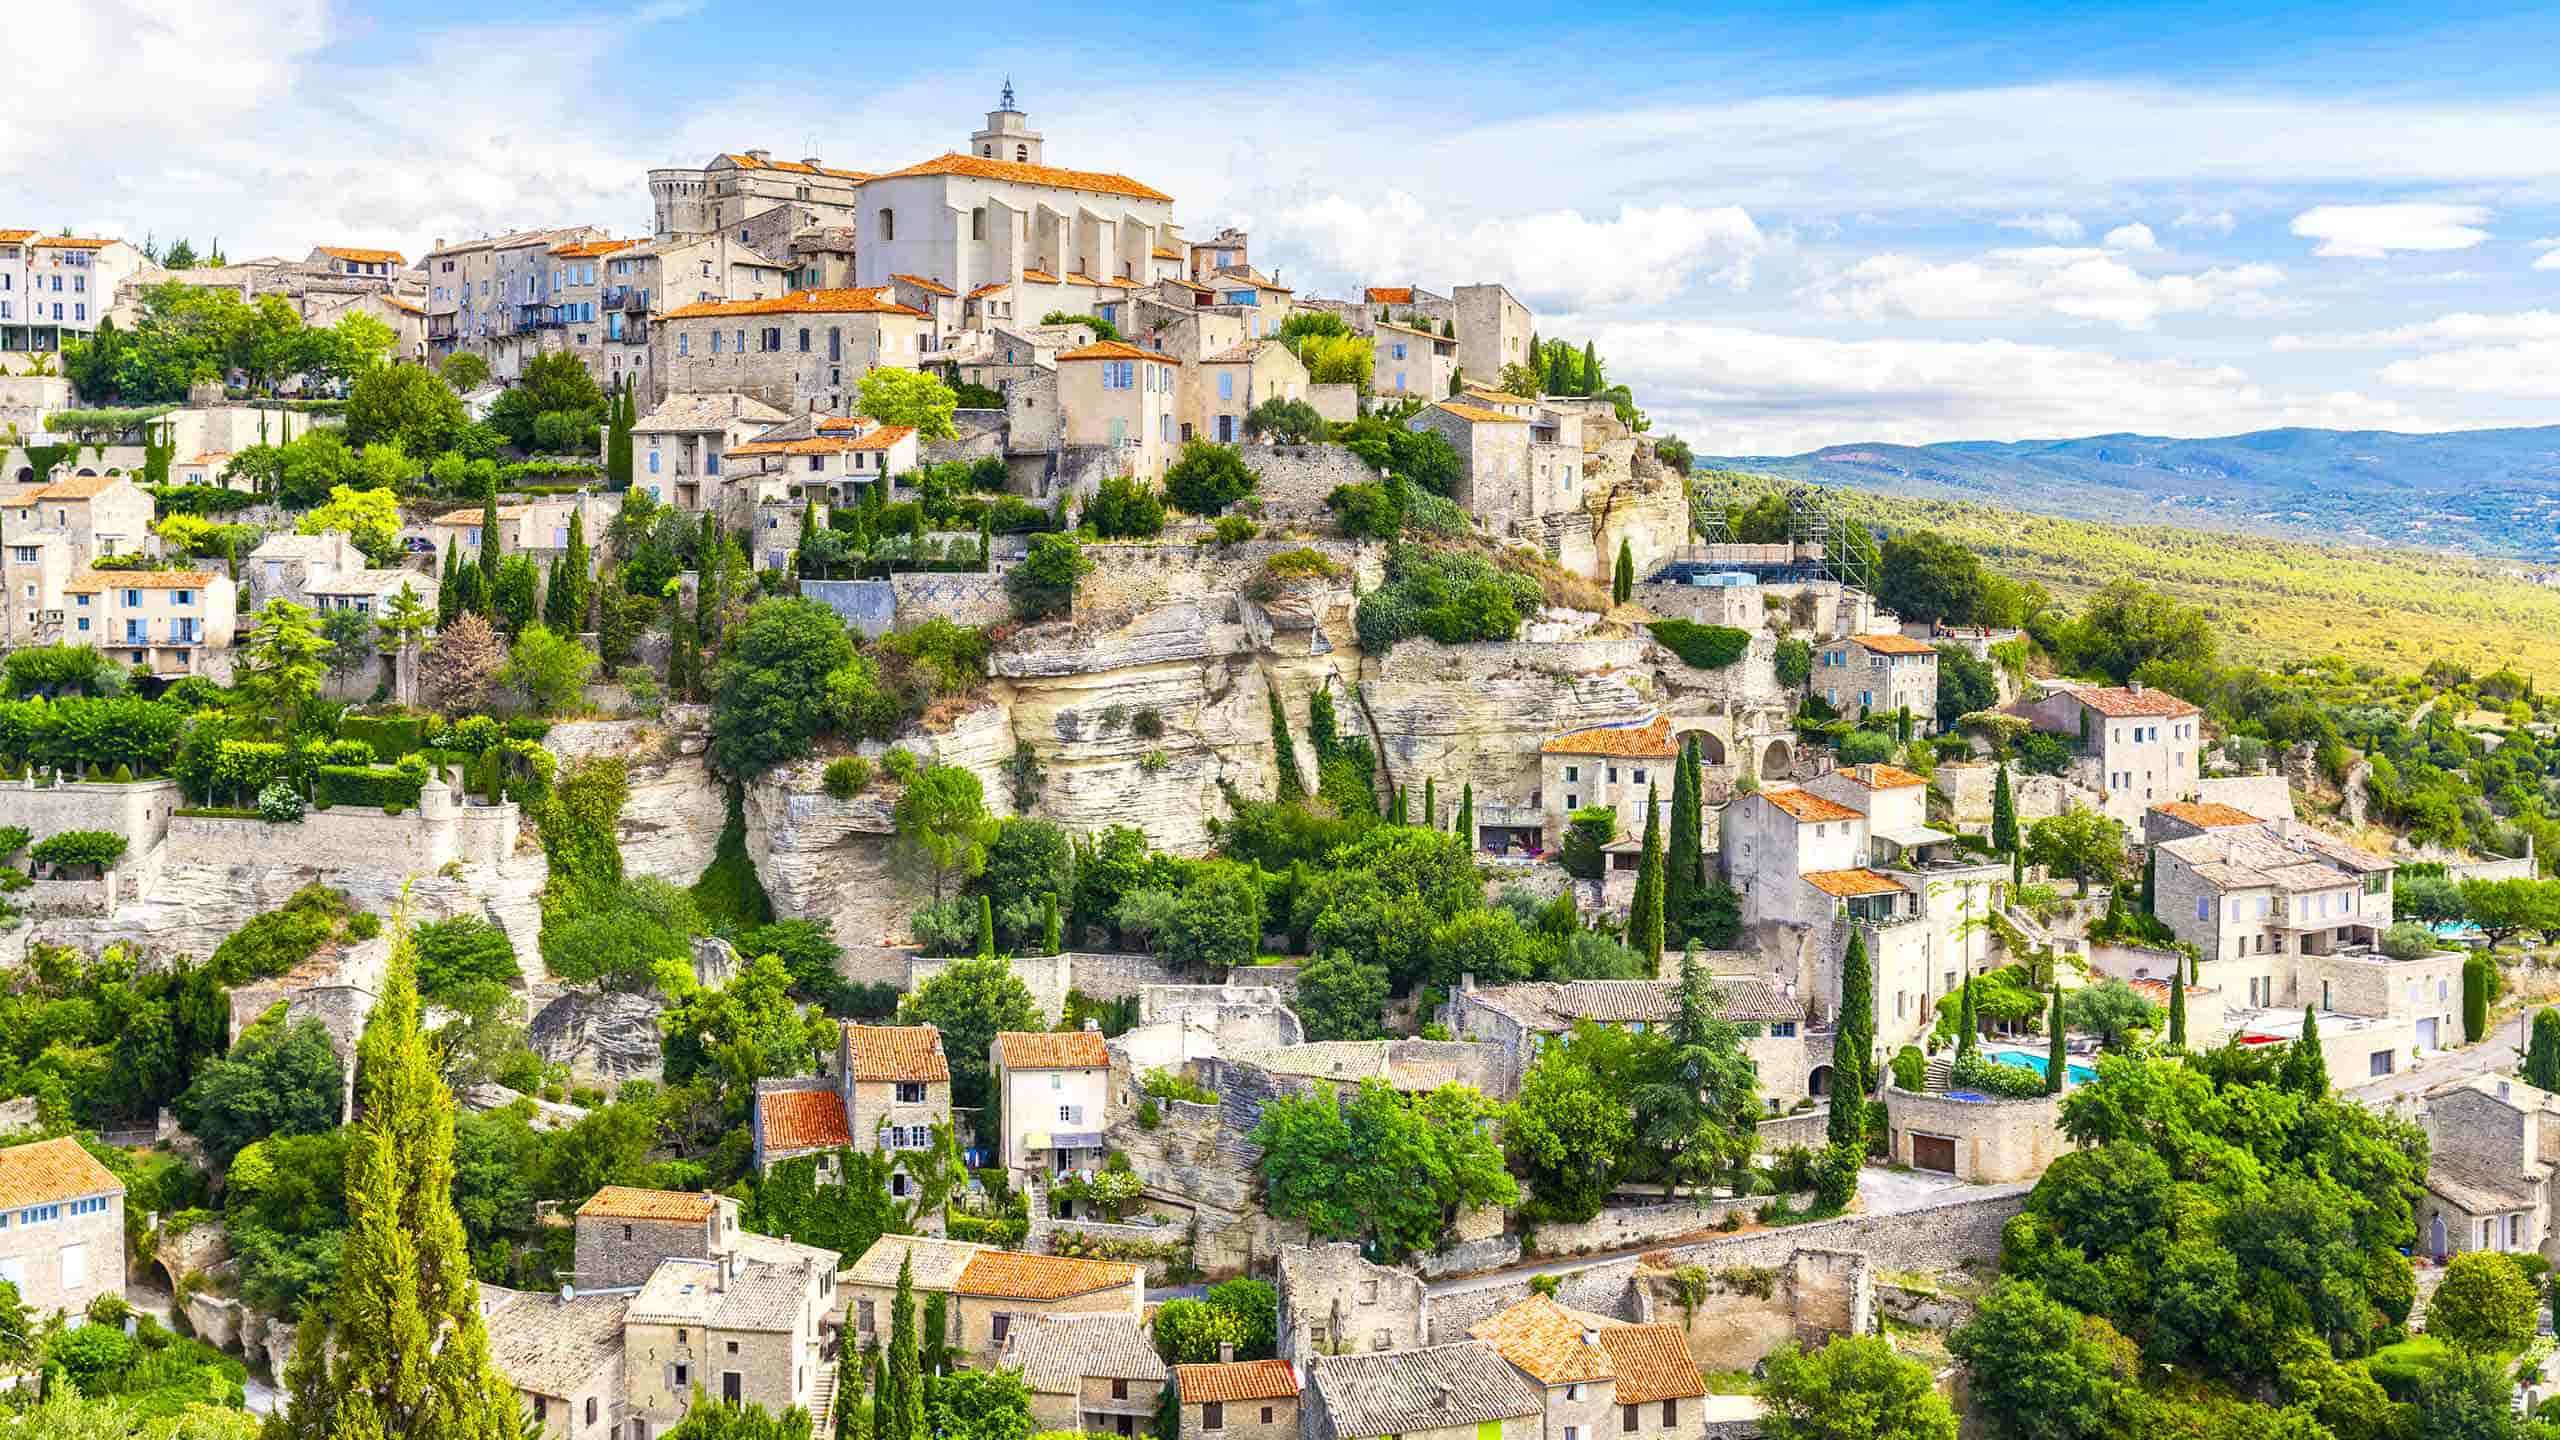 Southern France & Spain Walk (Provence to Costa Brava & Barcelona) 6D5N, Fully Guided